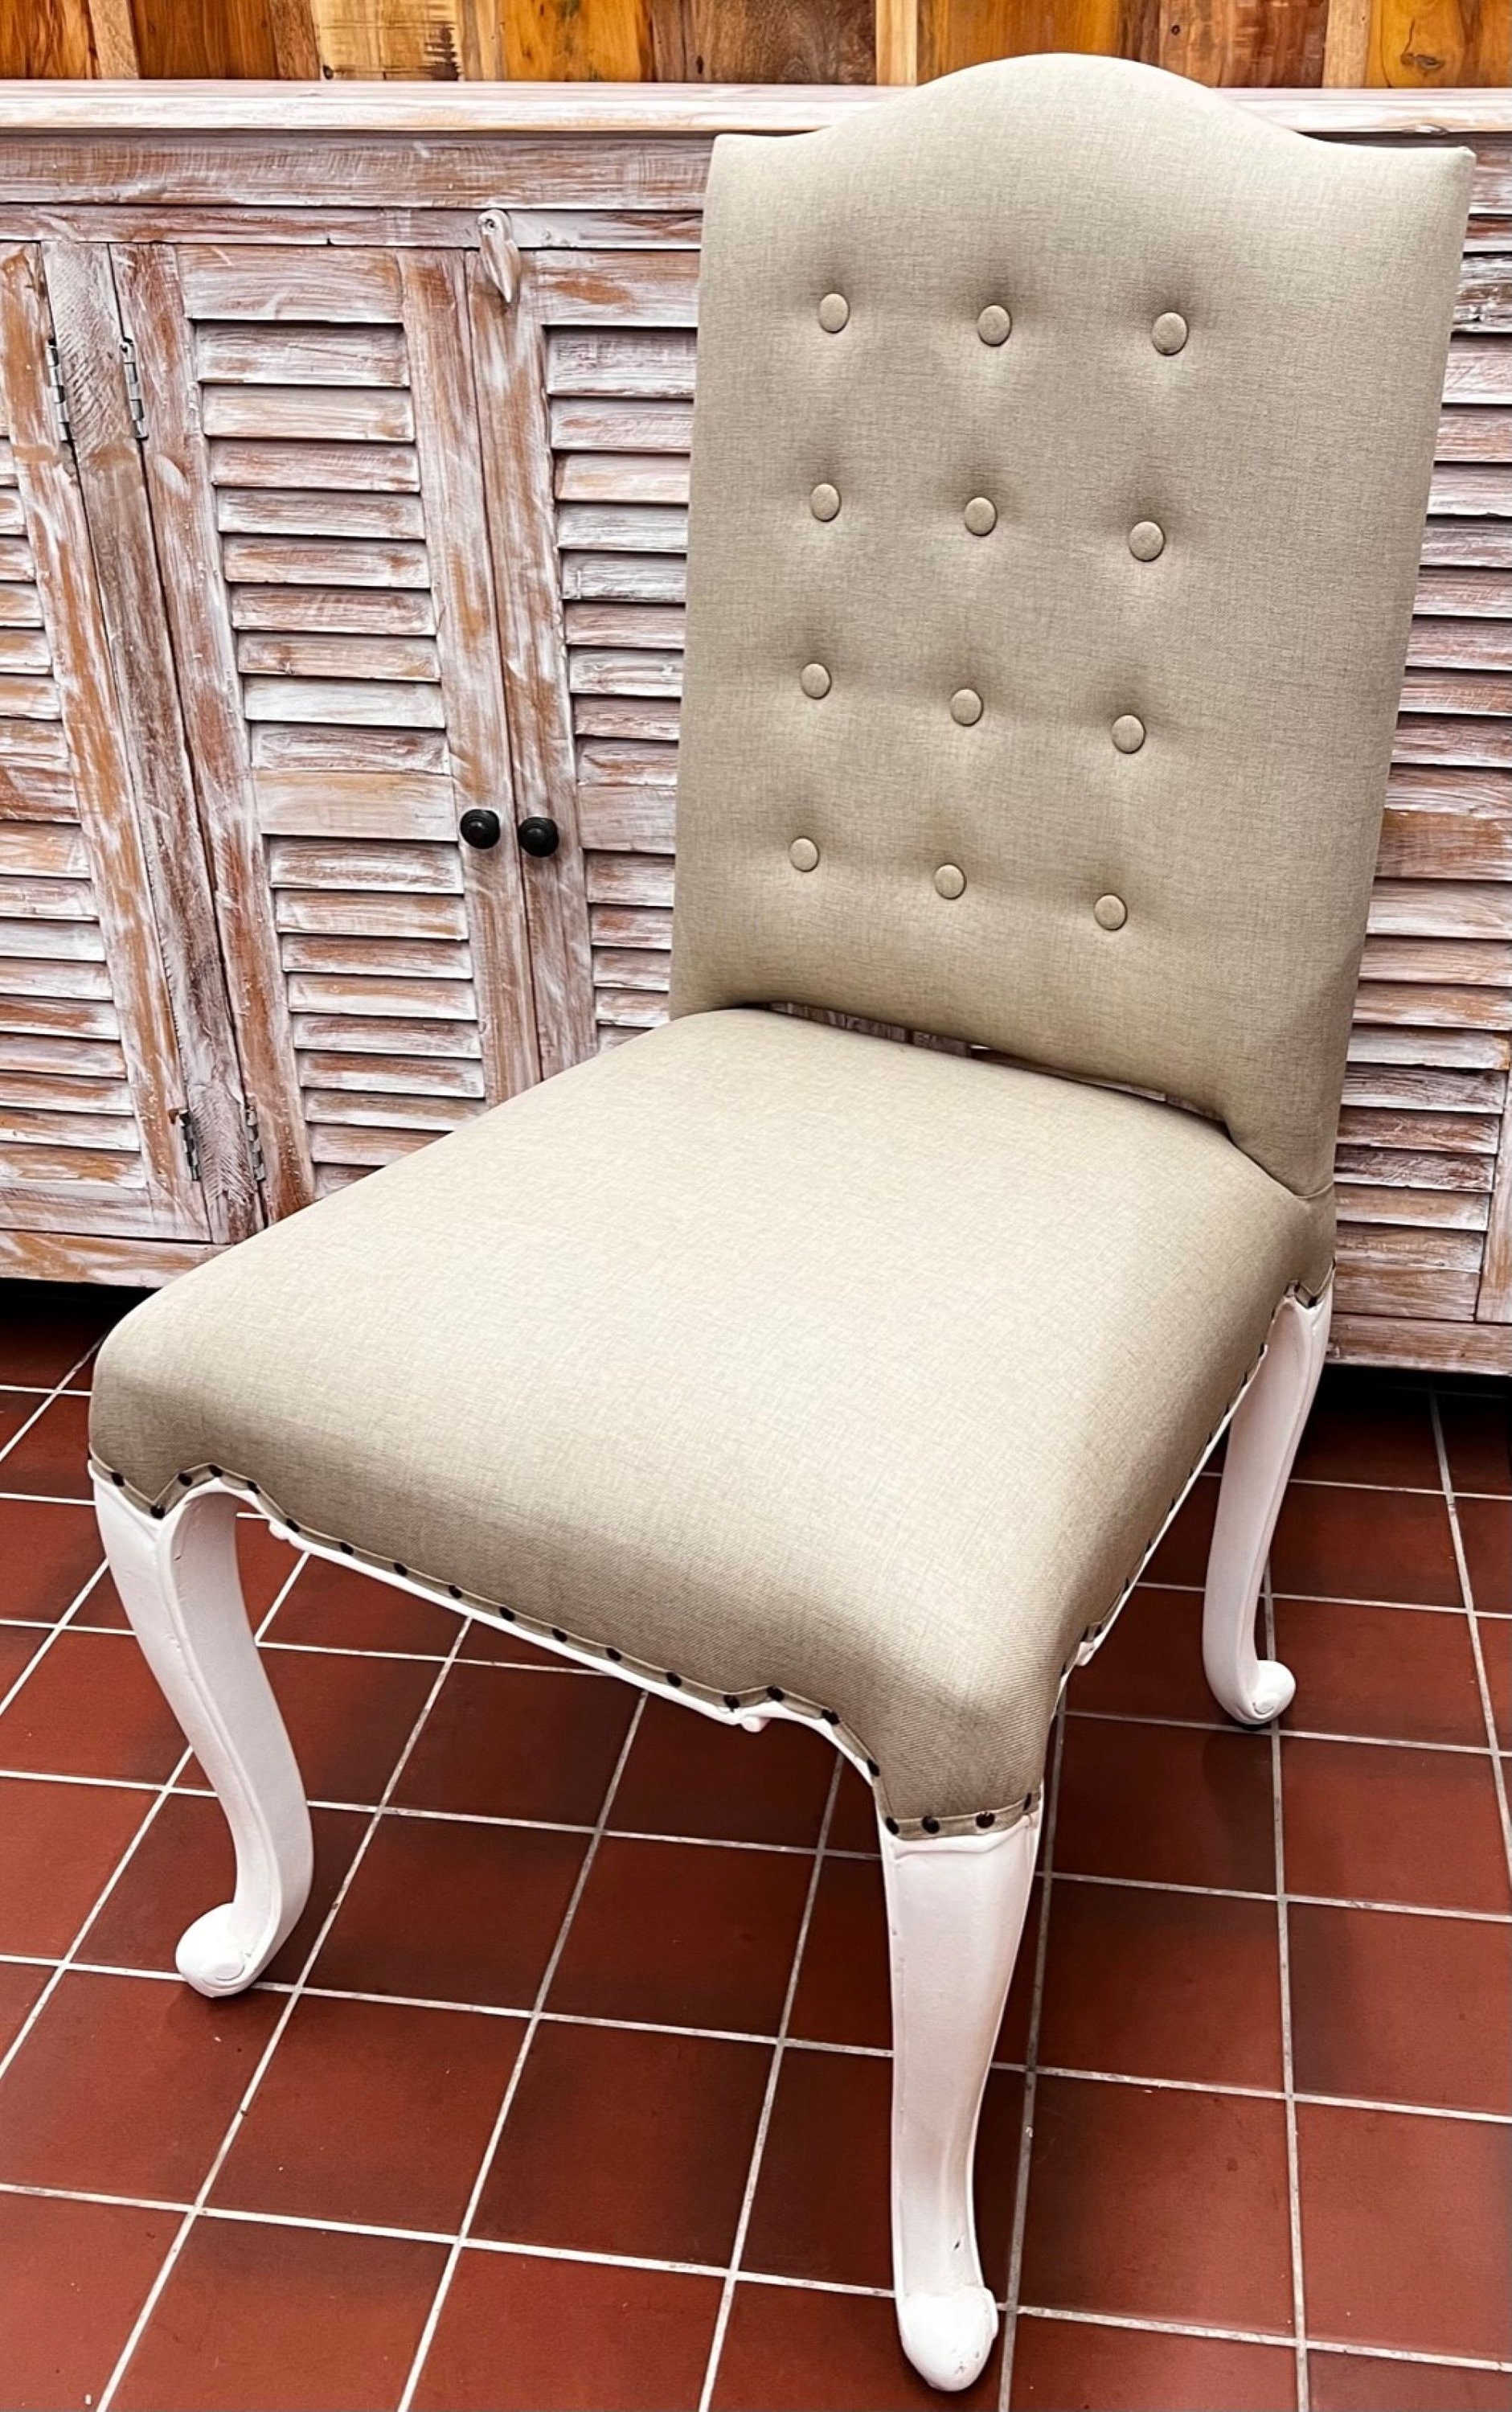 Sky French Country White Wood Beige Upholstered Seat King Louis Dining Arm  Chair